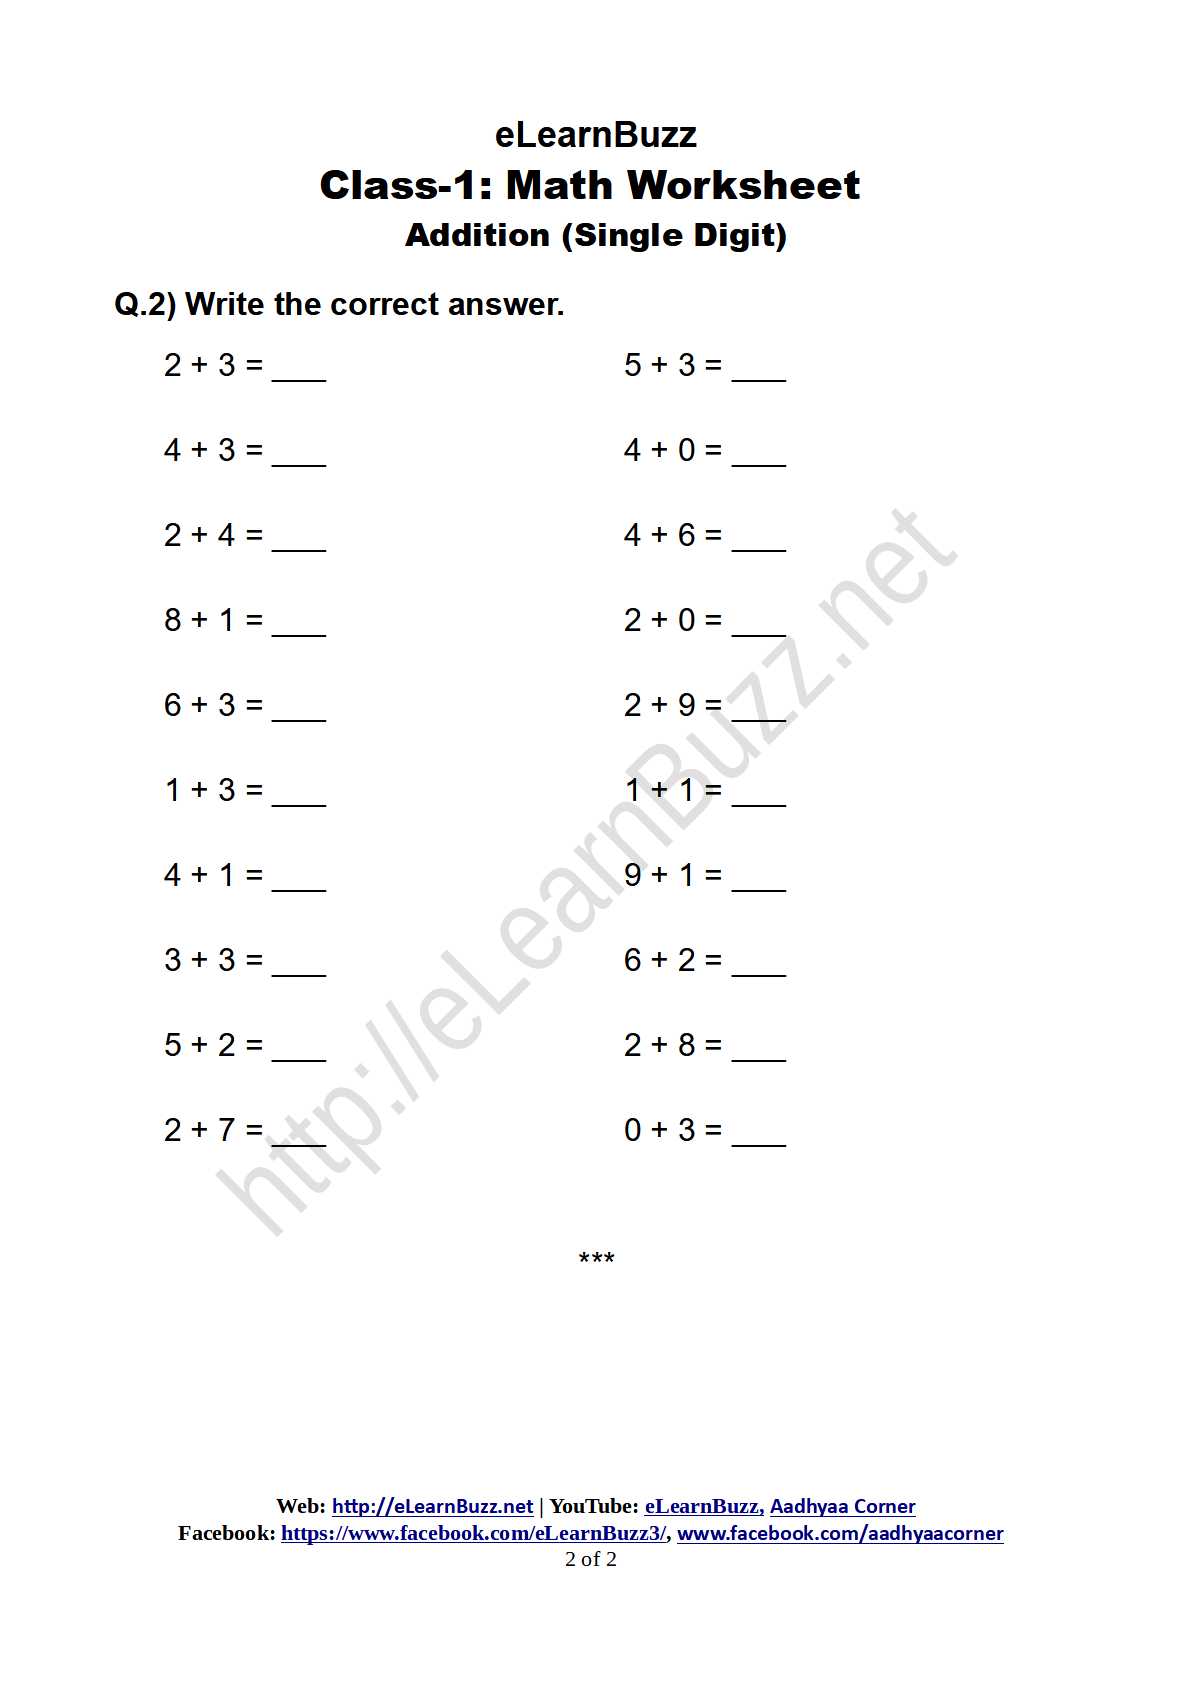 Single Digit Addition Worksheet For Class 1